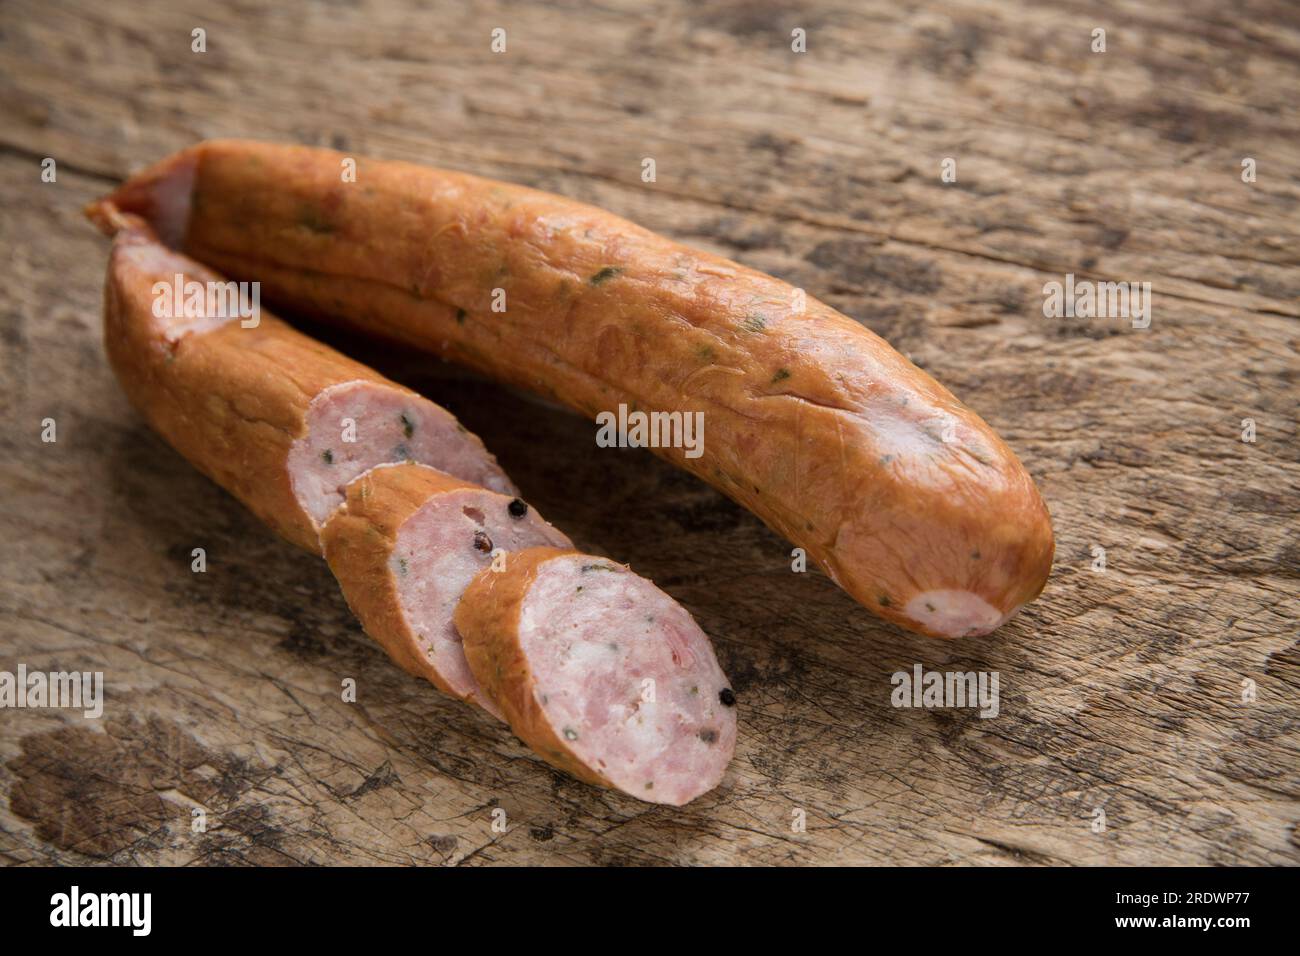 Polish sausages from a Polish delicatessen that have had herbs added to them. England UK GB Stock Photo